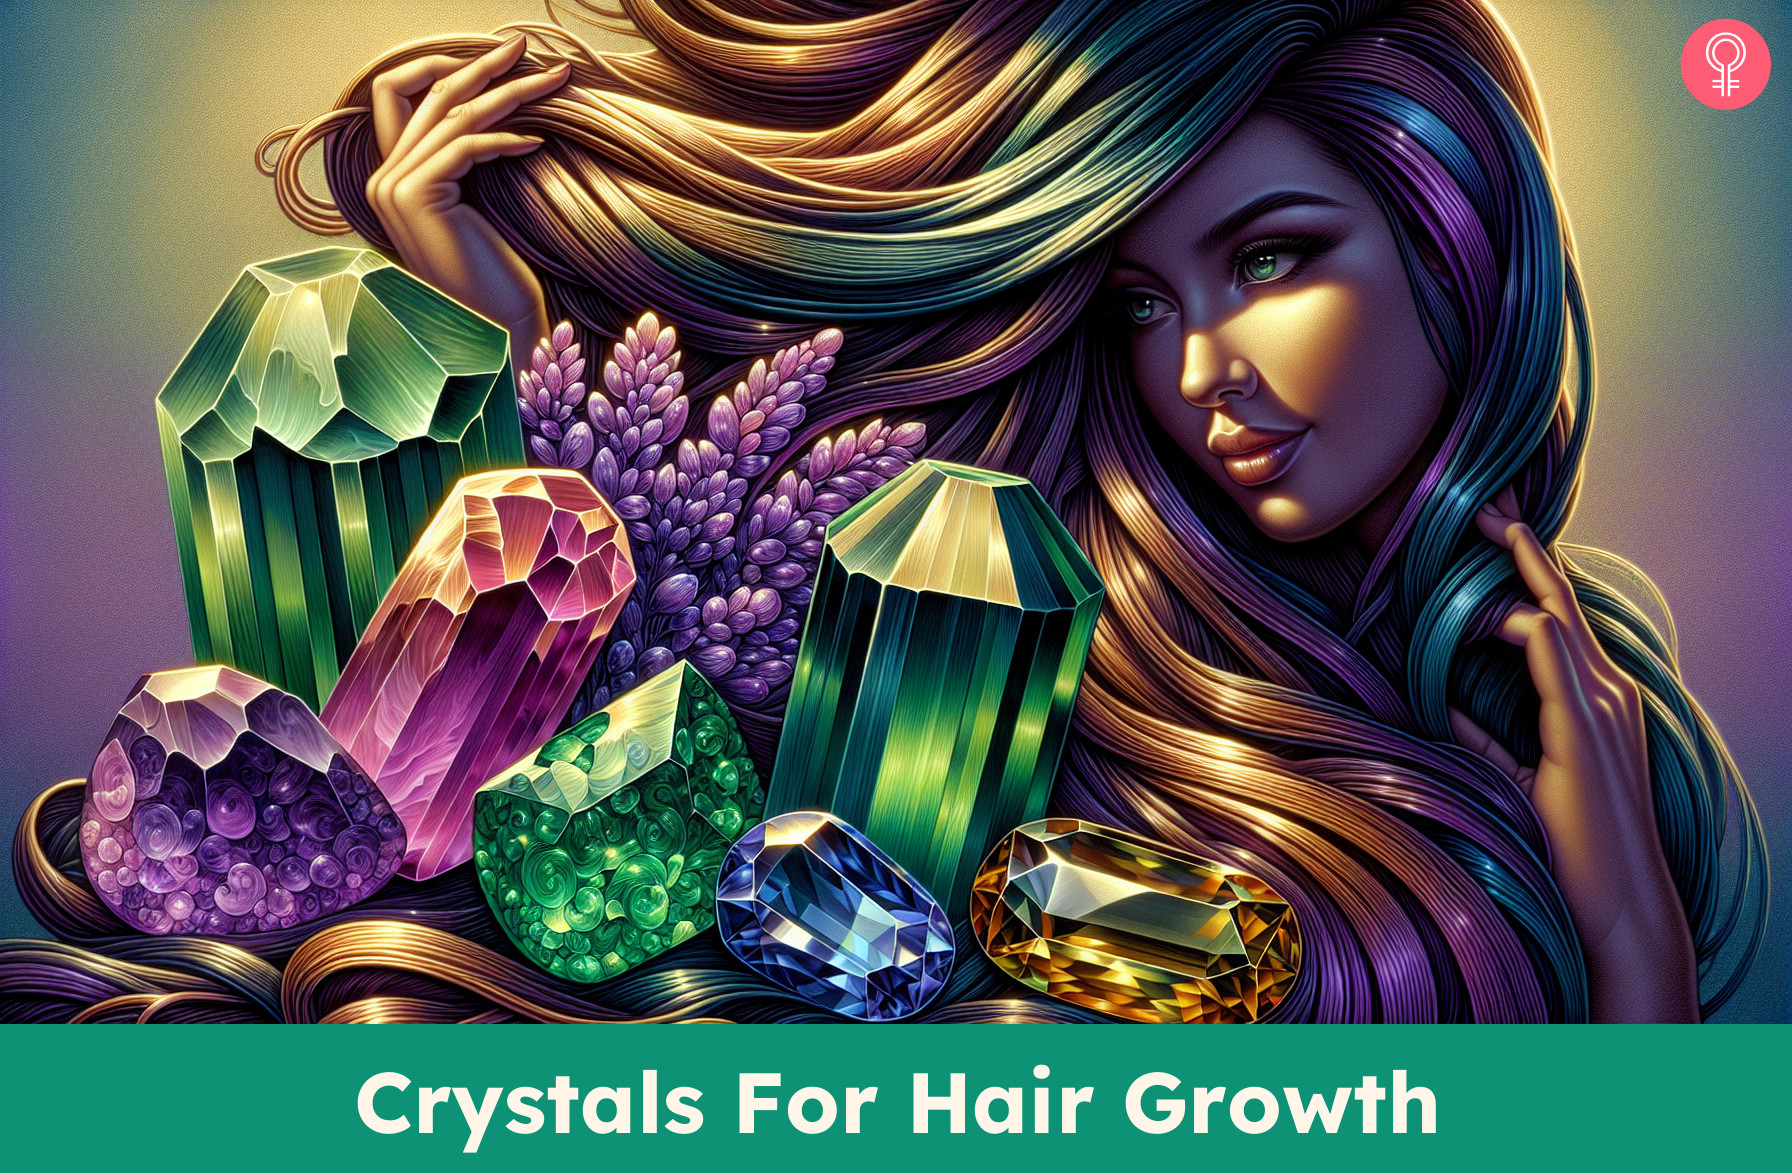 Crystals for Hair Growth_illustration